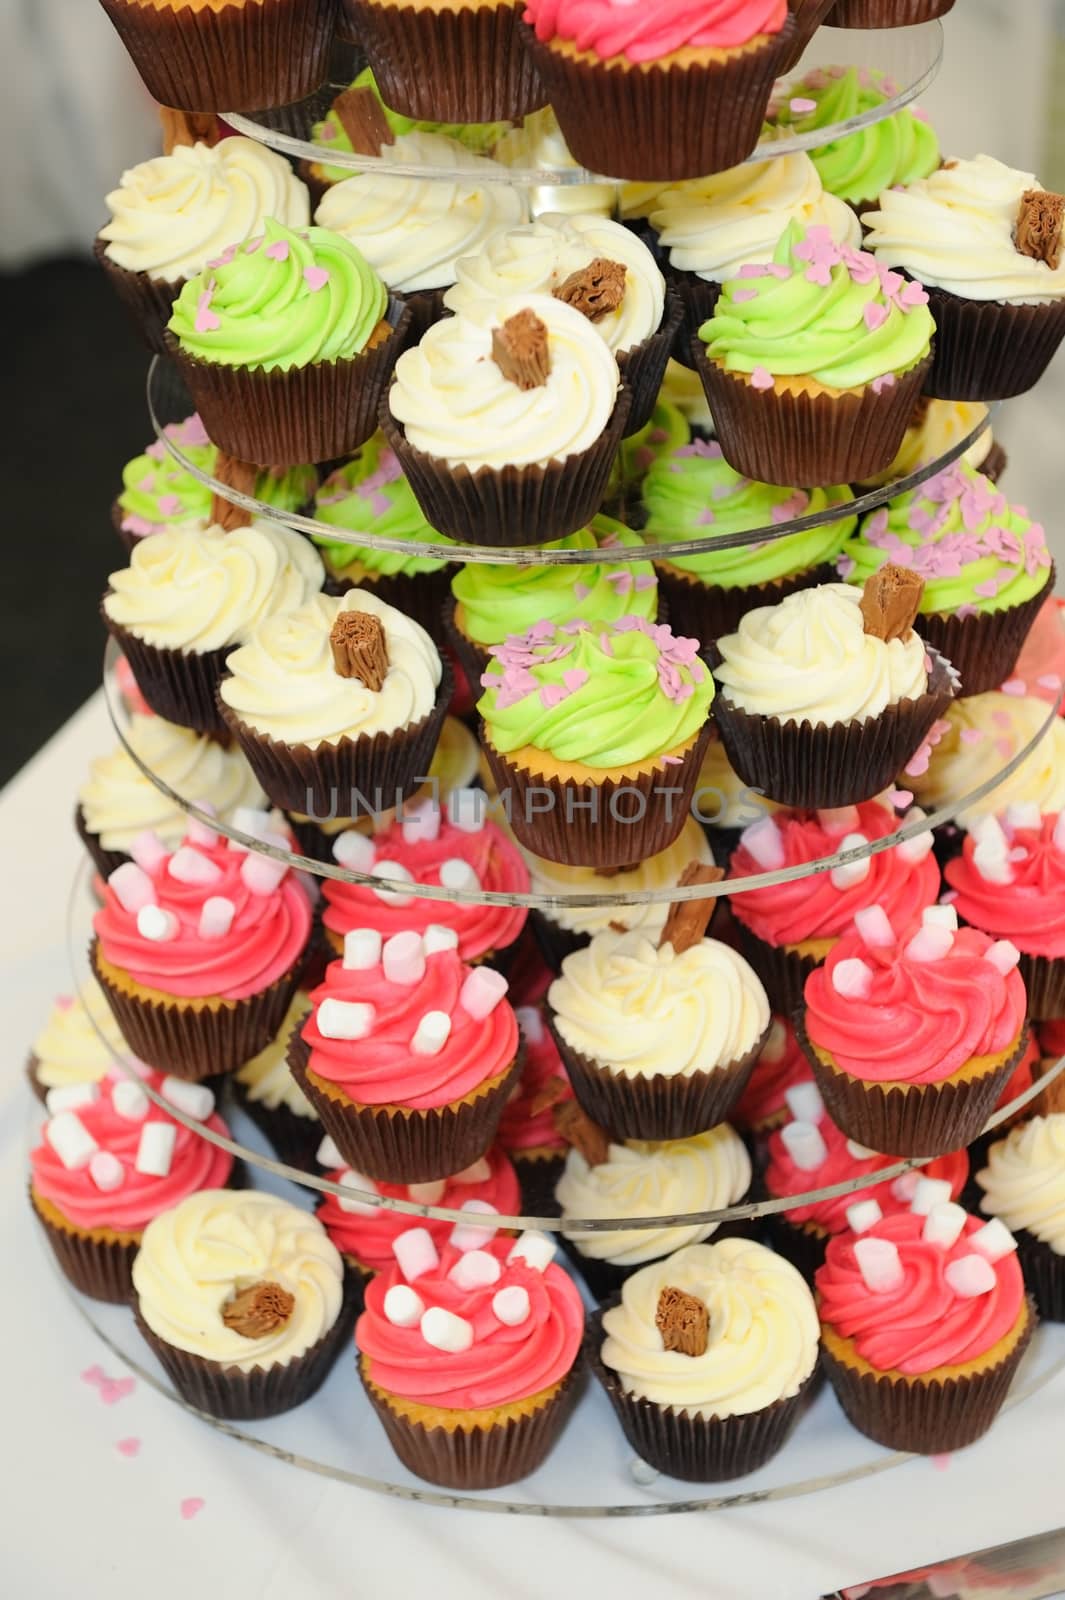 Wedding cup cakes by kmwphotography